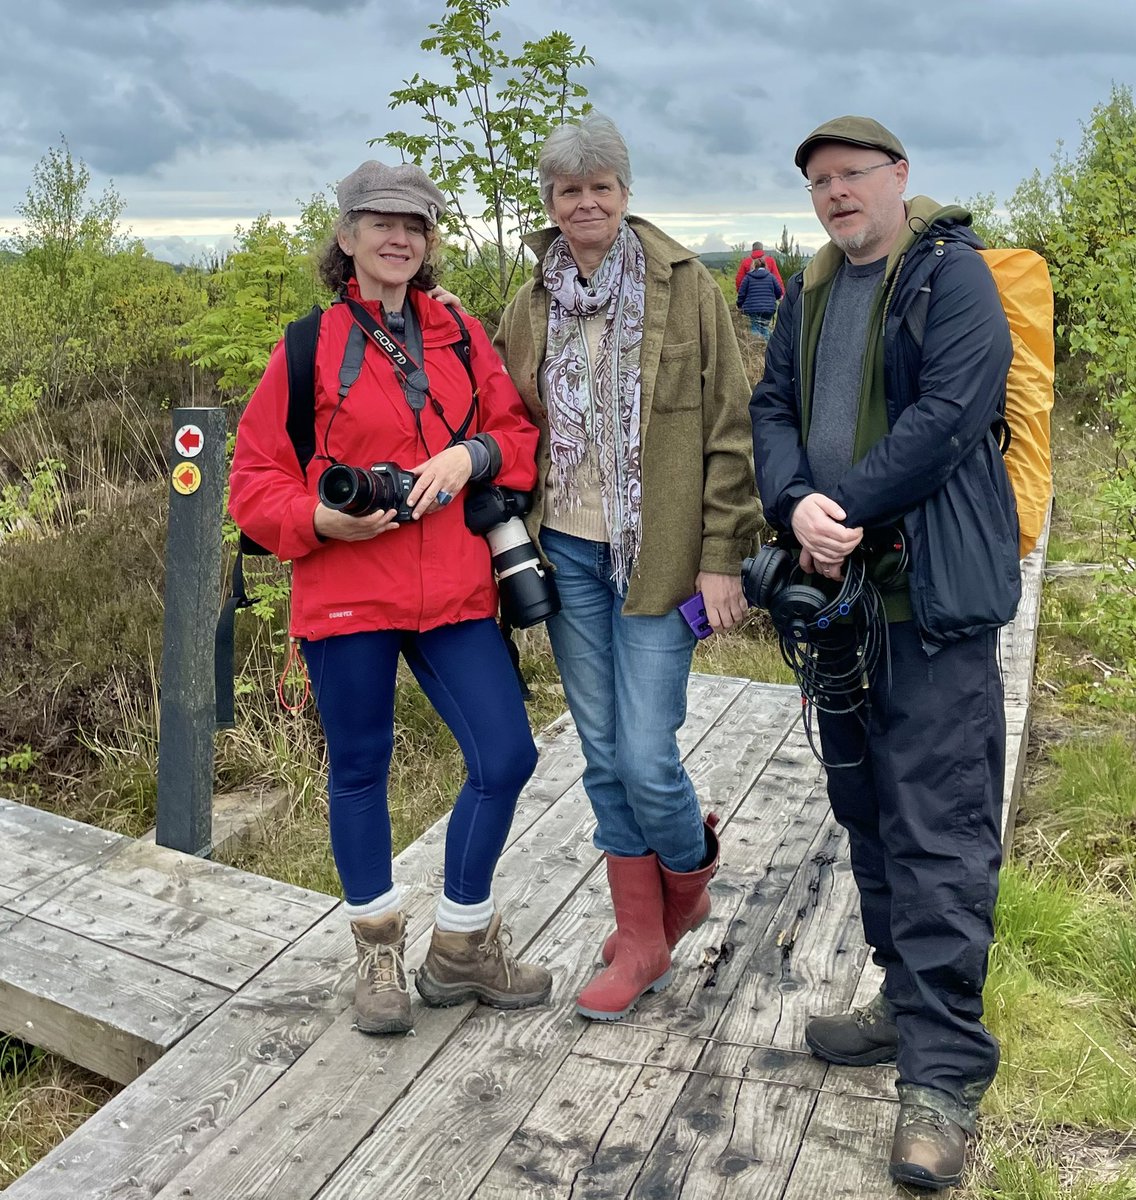 Annie,Fionnuala &Eoin recording & filming yesterday as part of @CCWPeatlands end of project conference👍 @anniehollandart @forum_wetlands @ipspeatlands @NenaghGuardian @PPNTipperary @TipperaryArts @JamieRohu @Notice_Nature @NPWSNatureCons